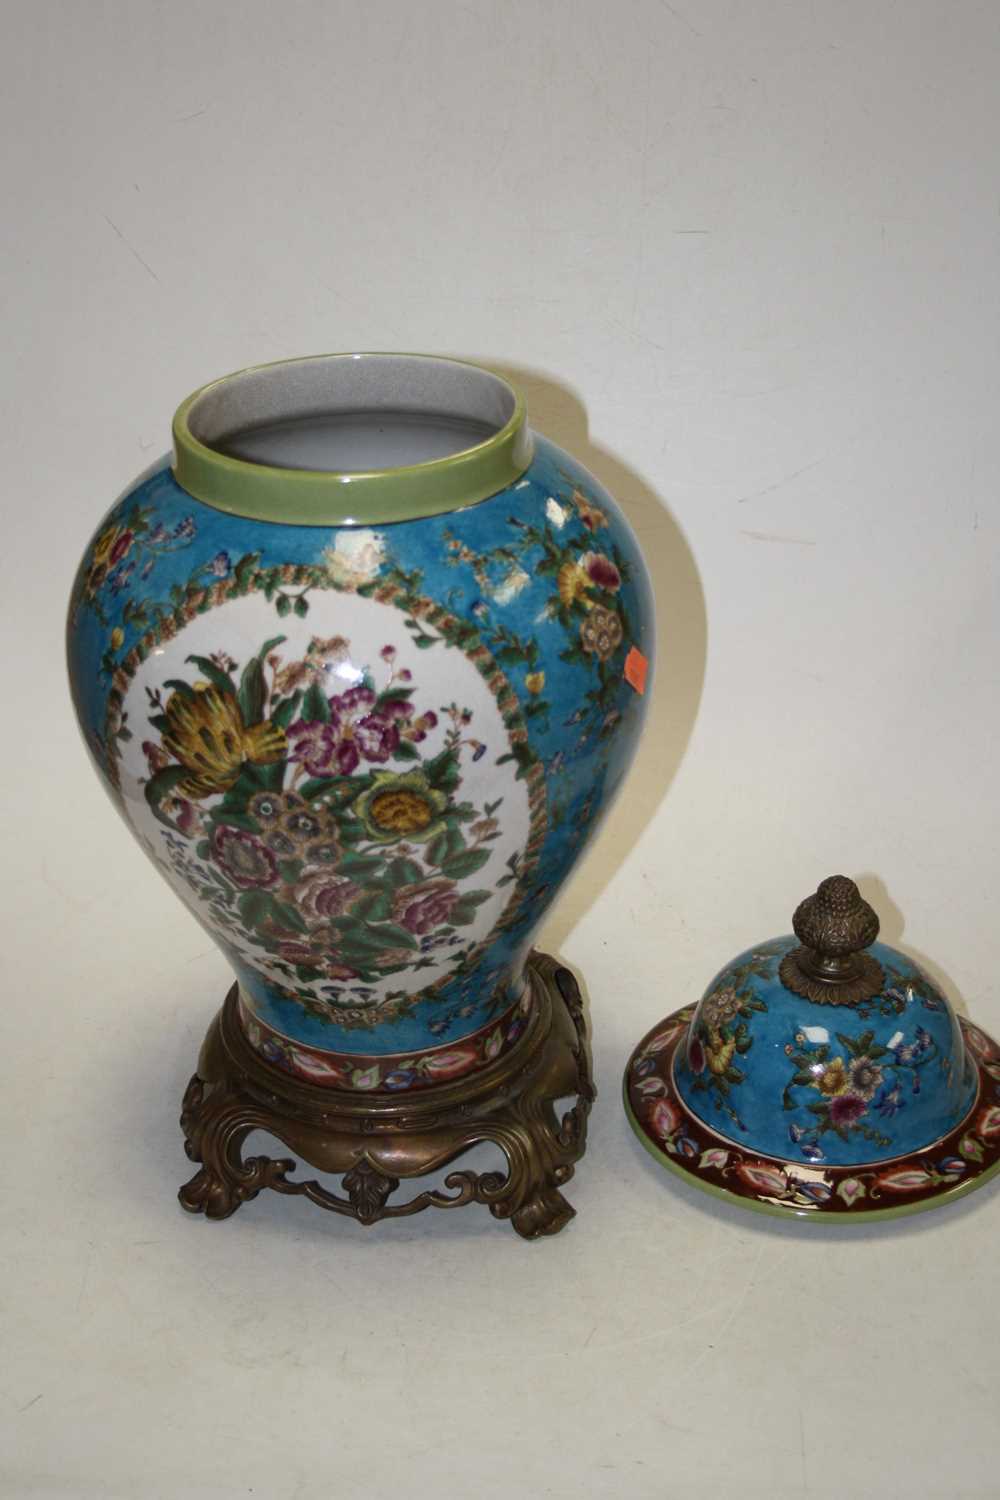 An 18th century style brass mounted jar and cover, of baluster form, with floral decoration, mounted - Image 7 of 7